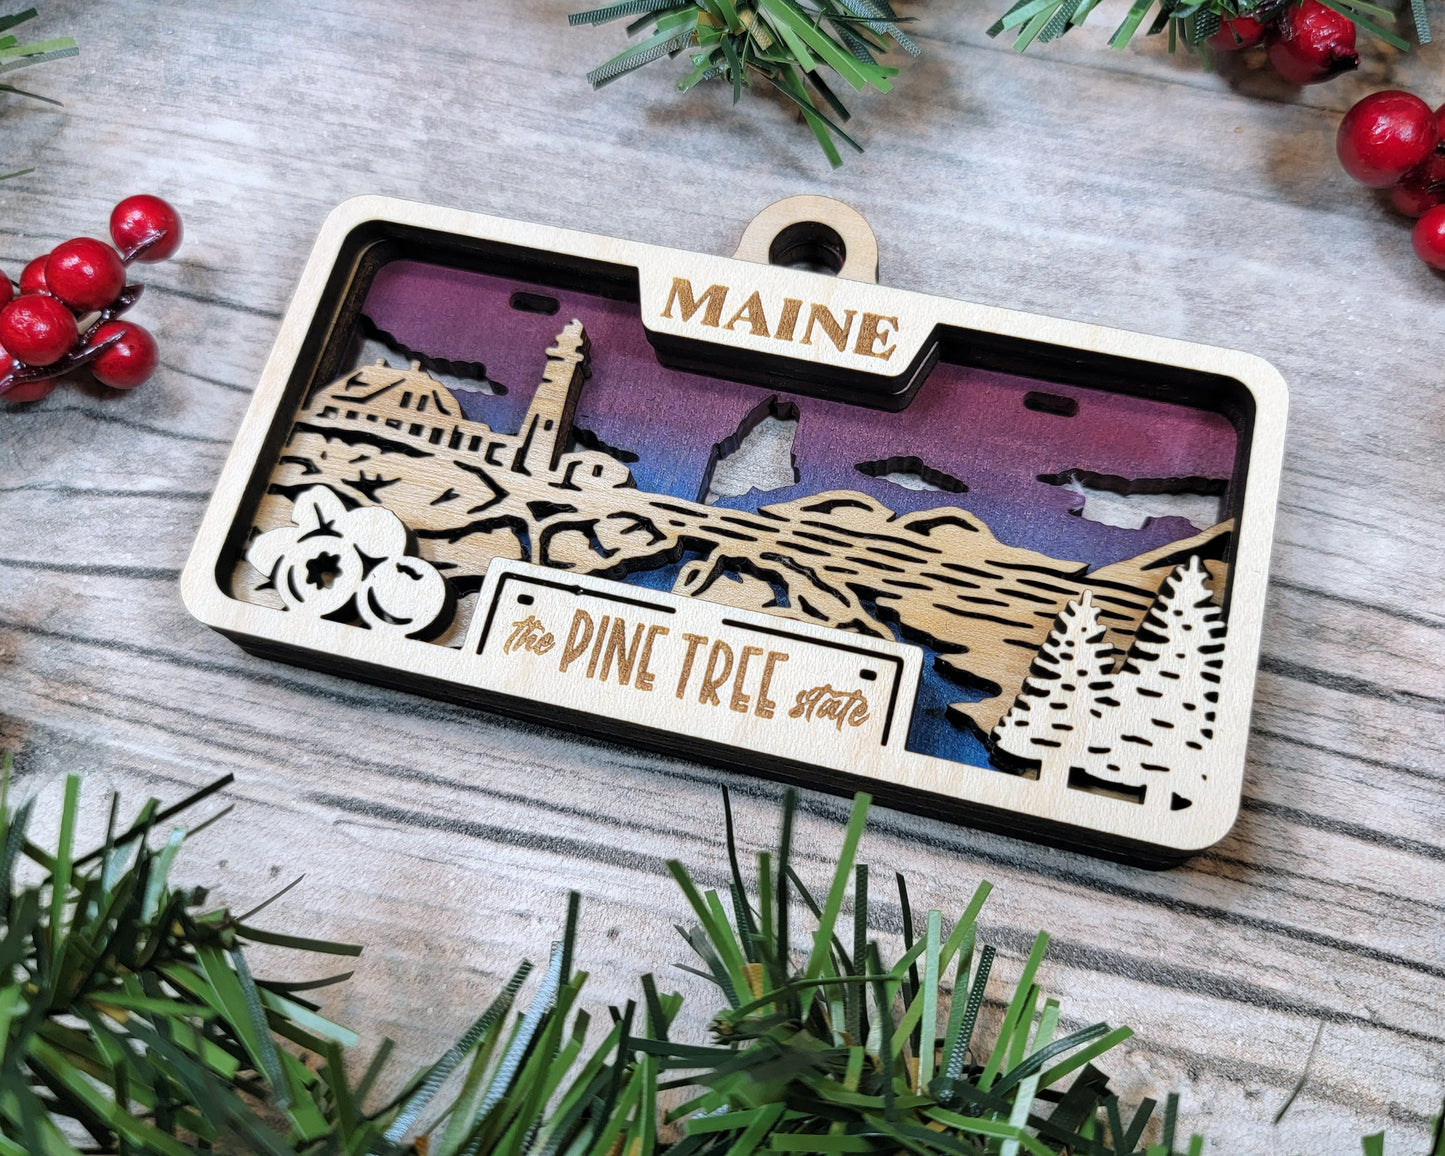 Maine State Plate Ornament and Signage - SVG File Download - Sized for Glowforge - Laser Ready Digital Files